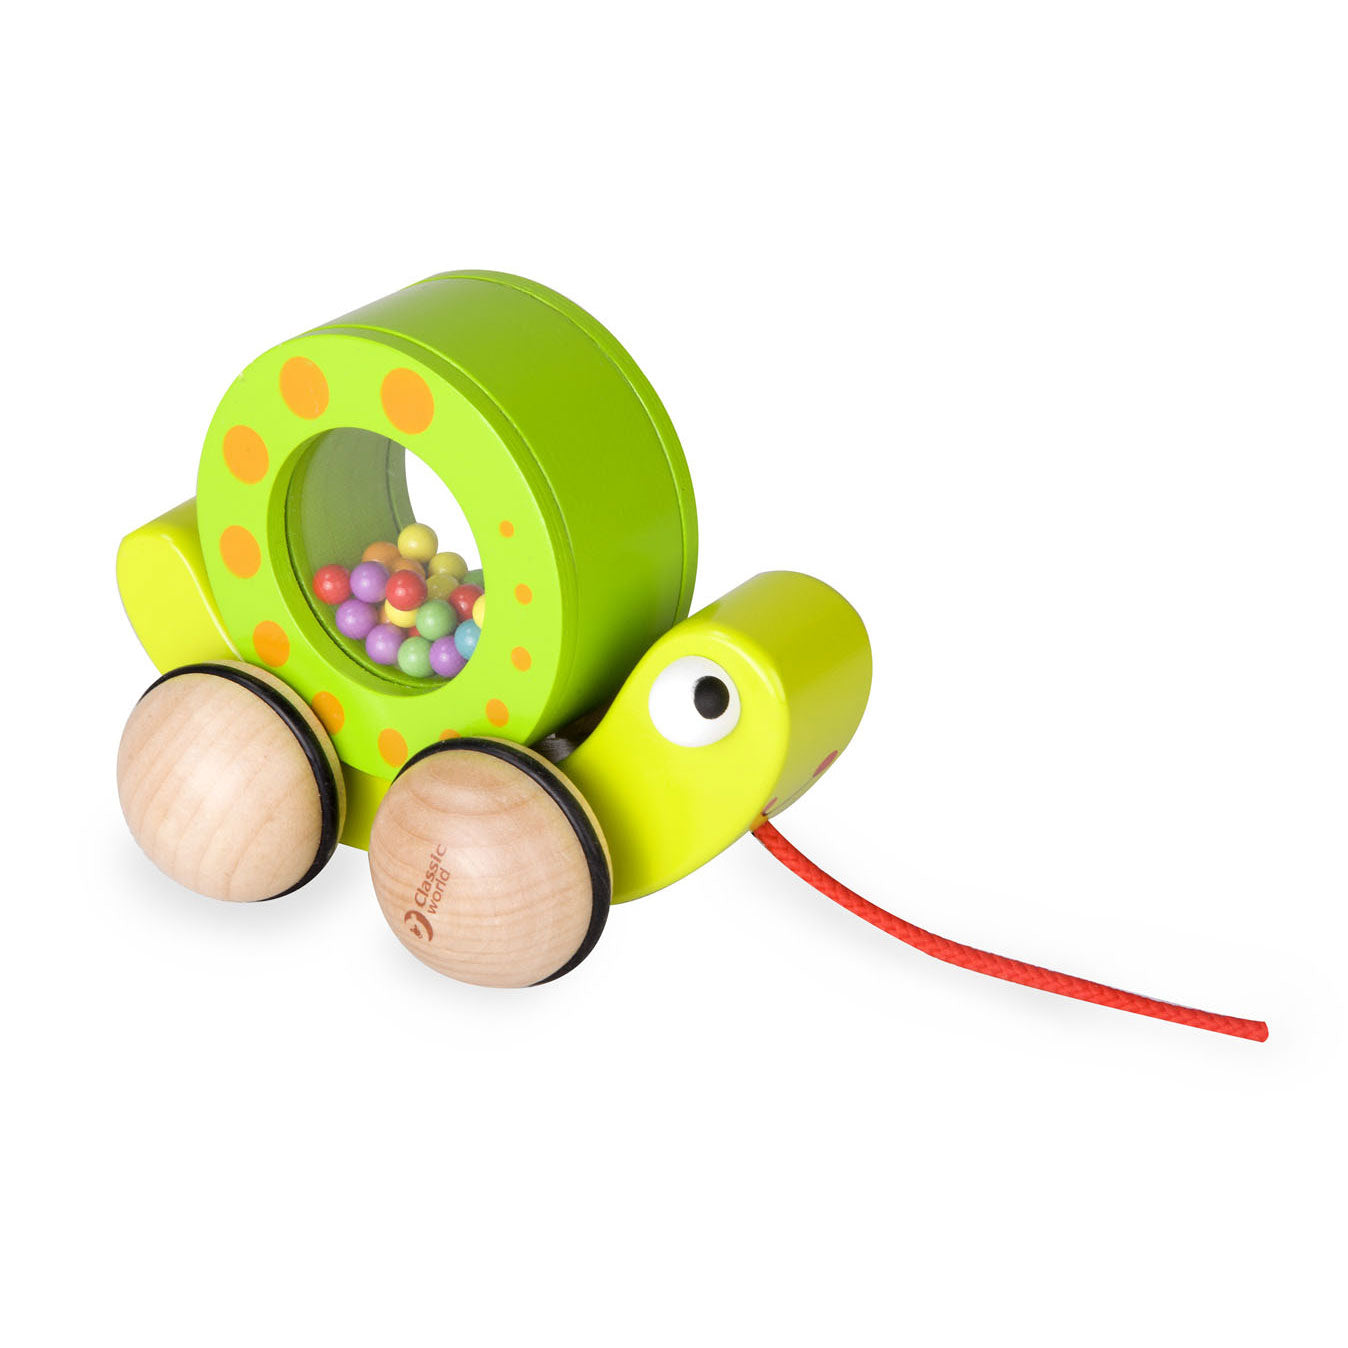 Classic World Wooden Pulling Snail Figure